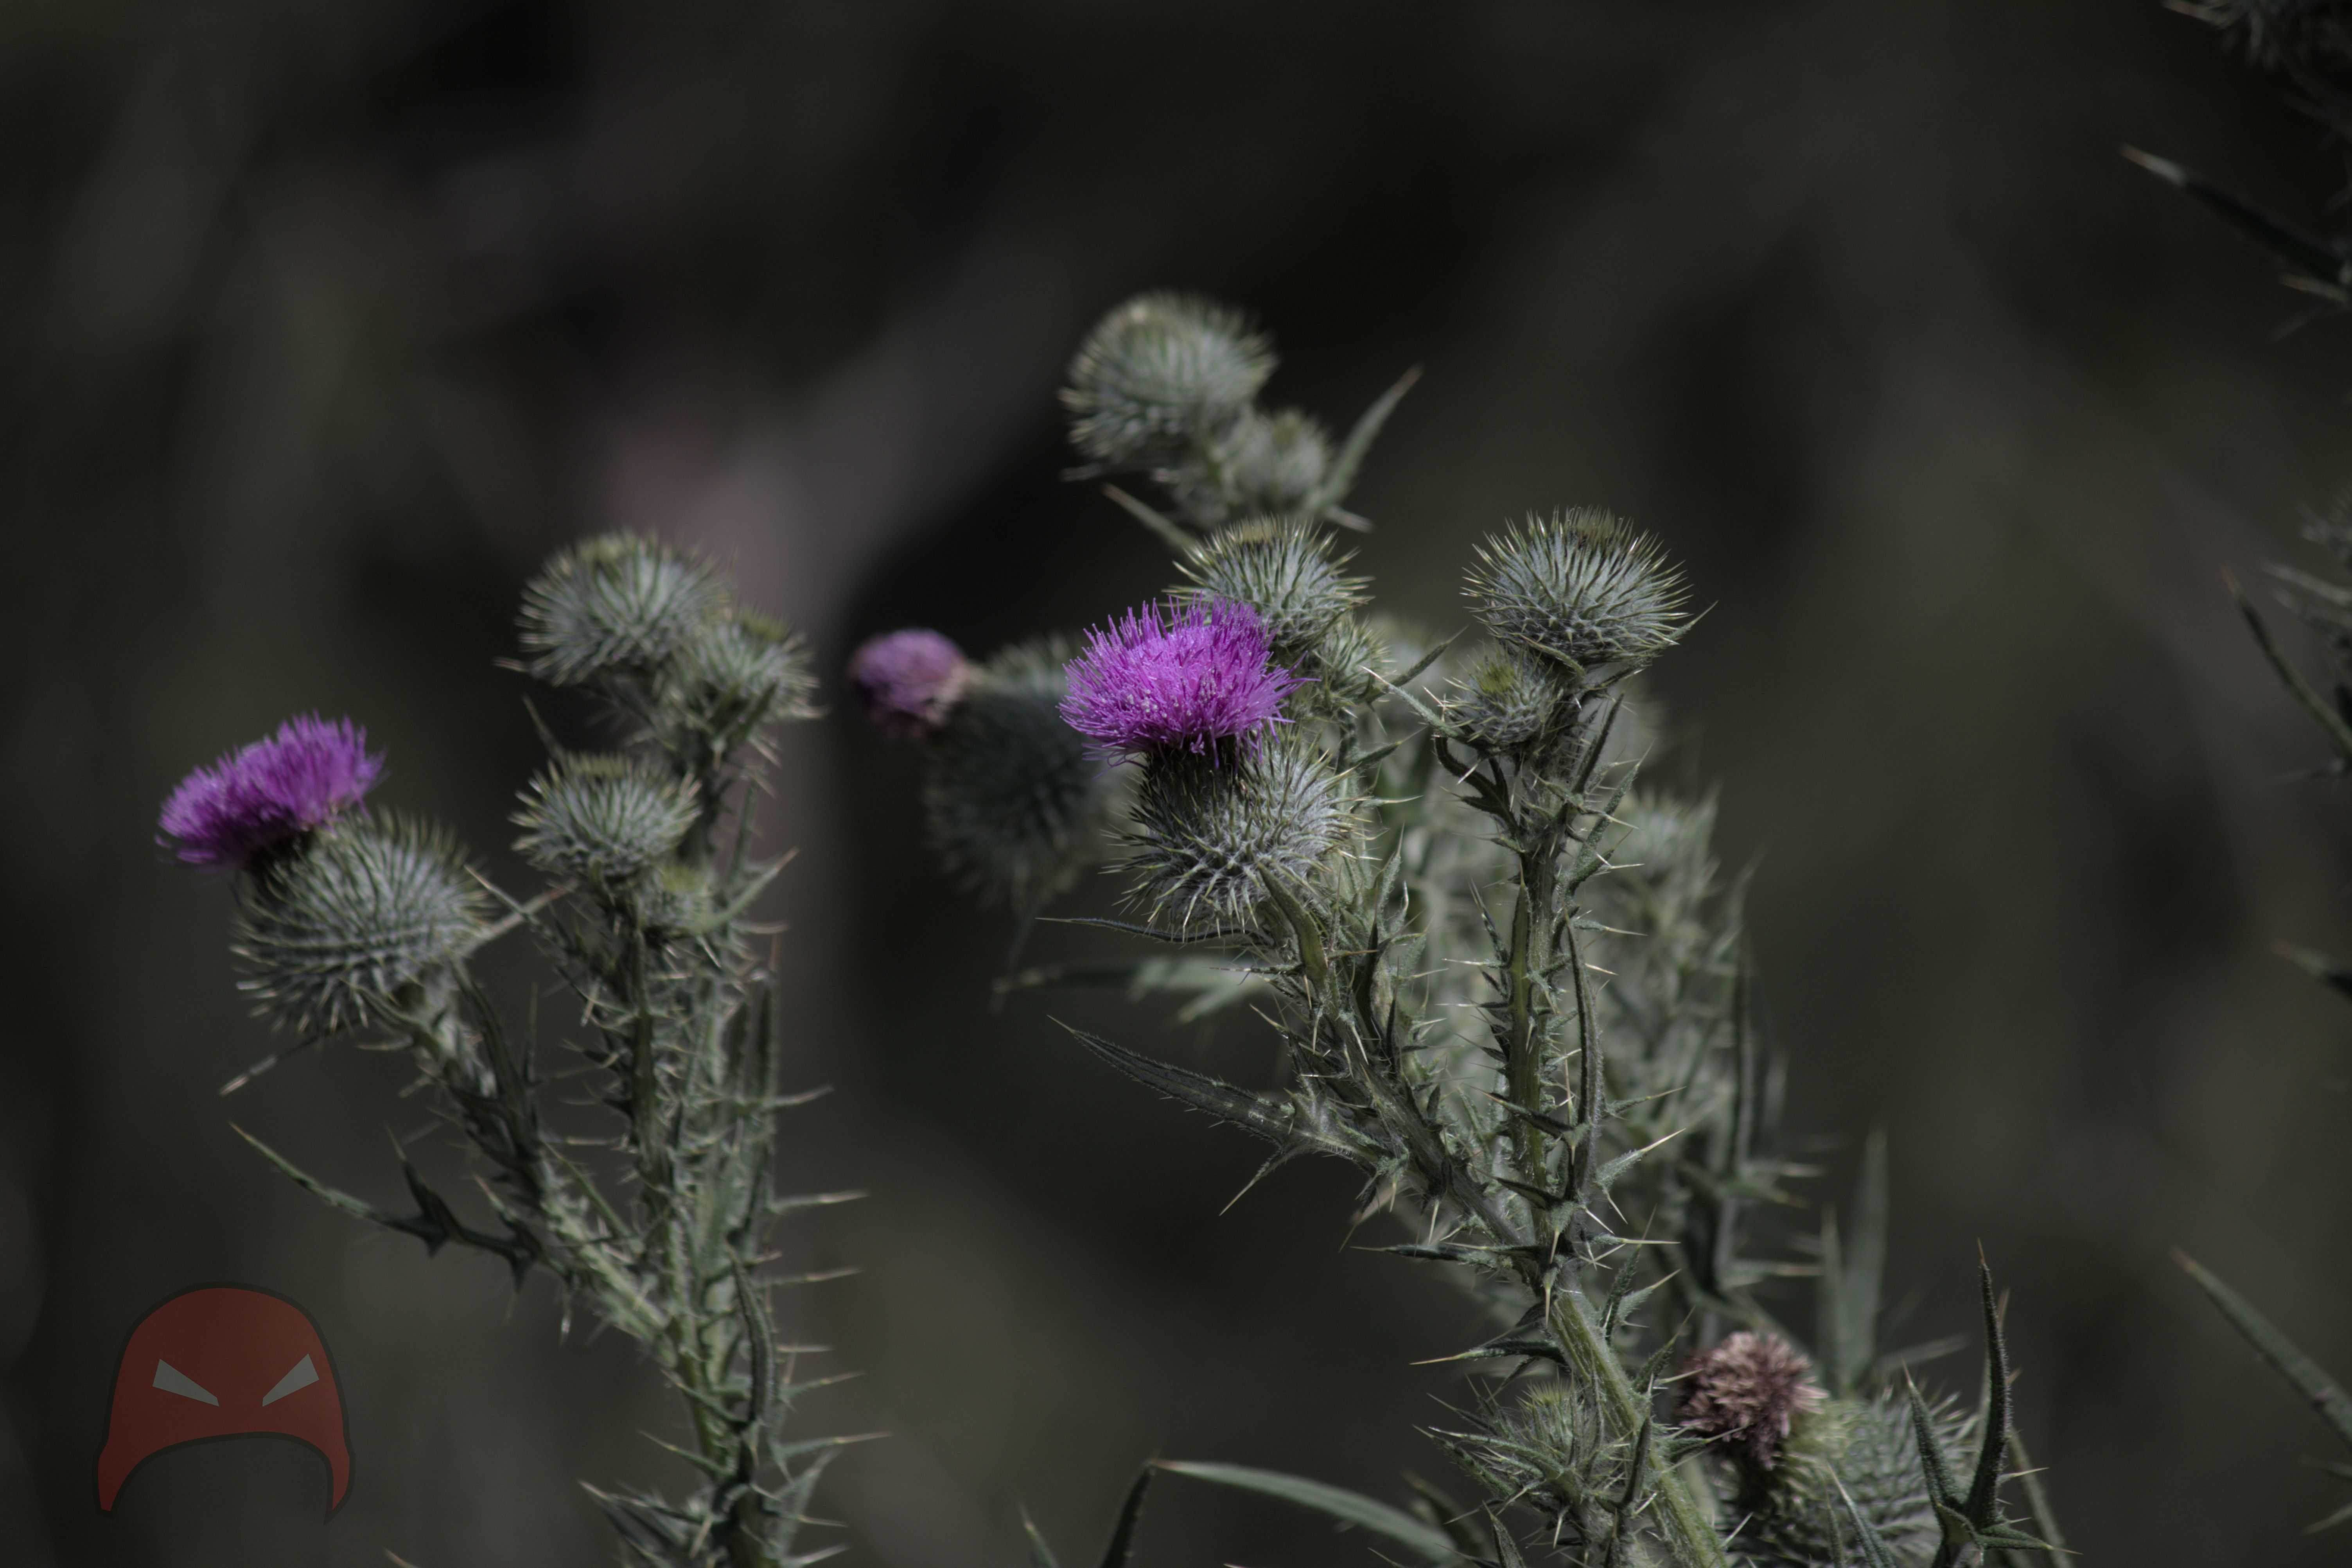 A picture of Scotch Thistle. Centred in the image is a thistle bulb with a deep purple flower.